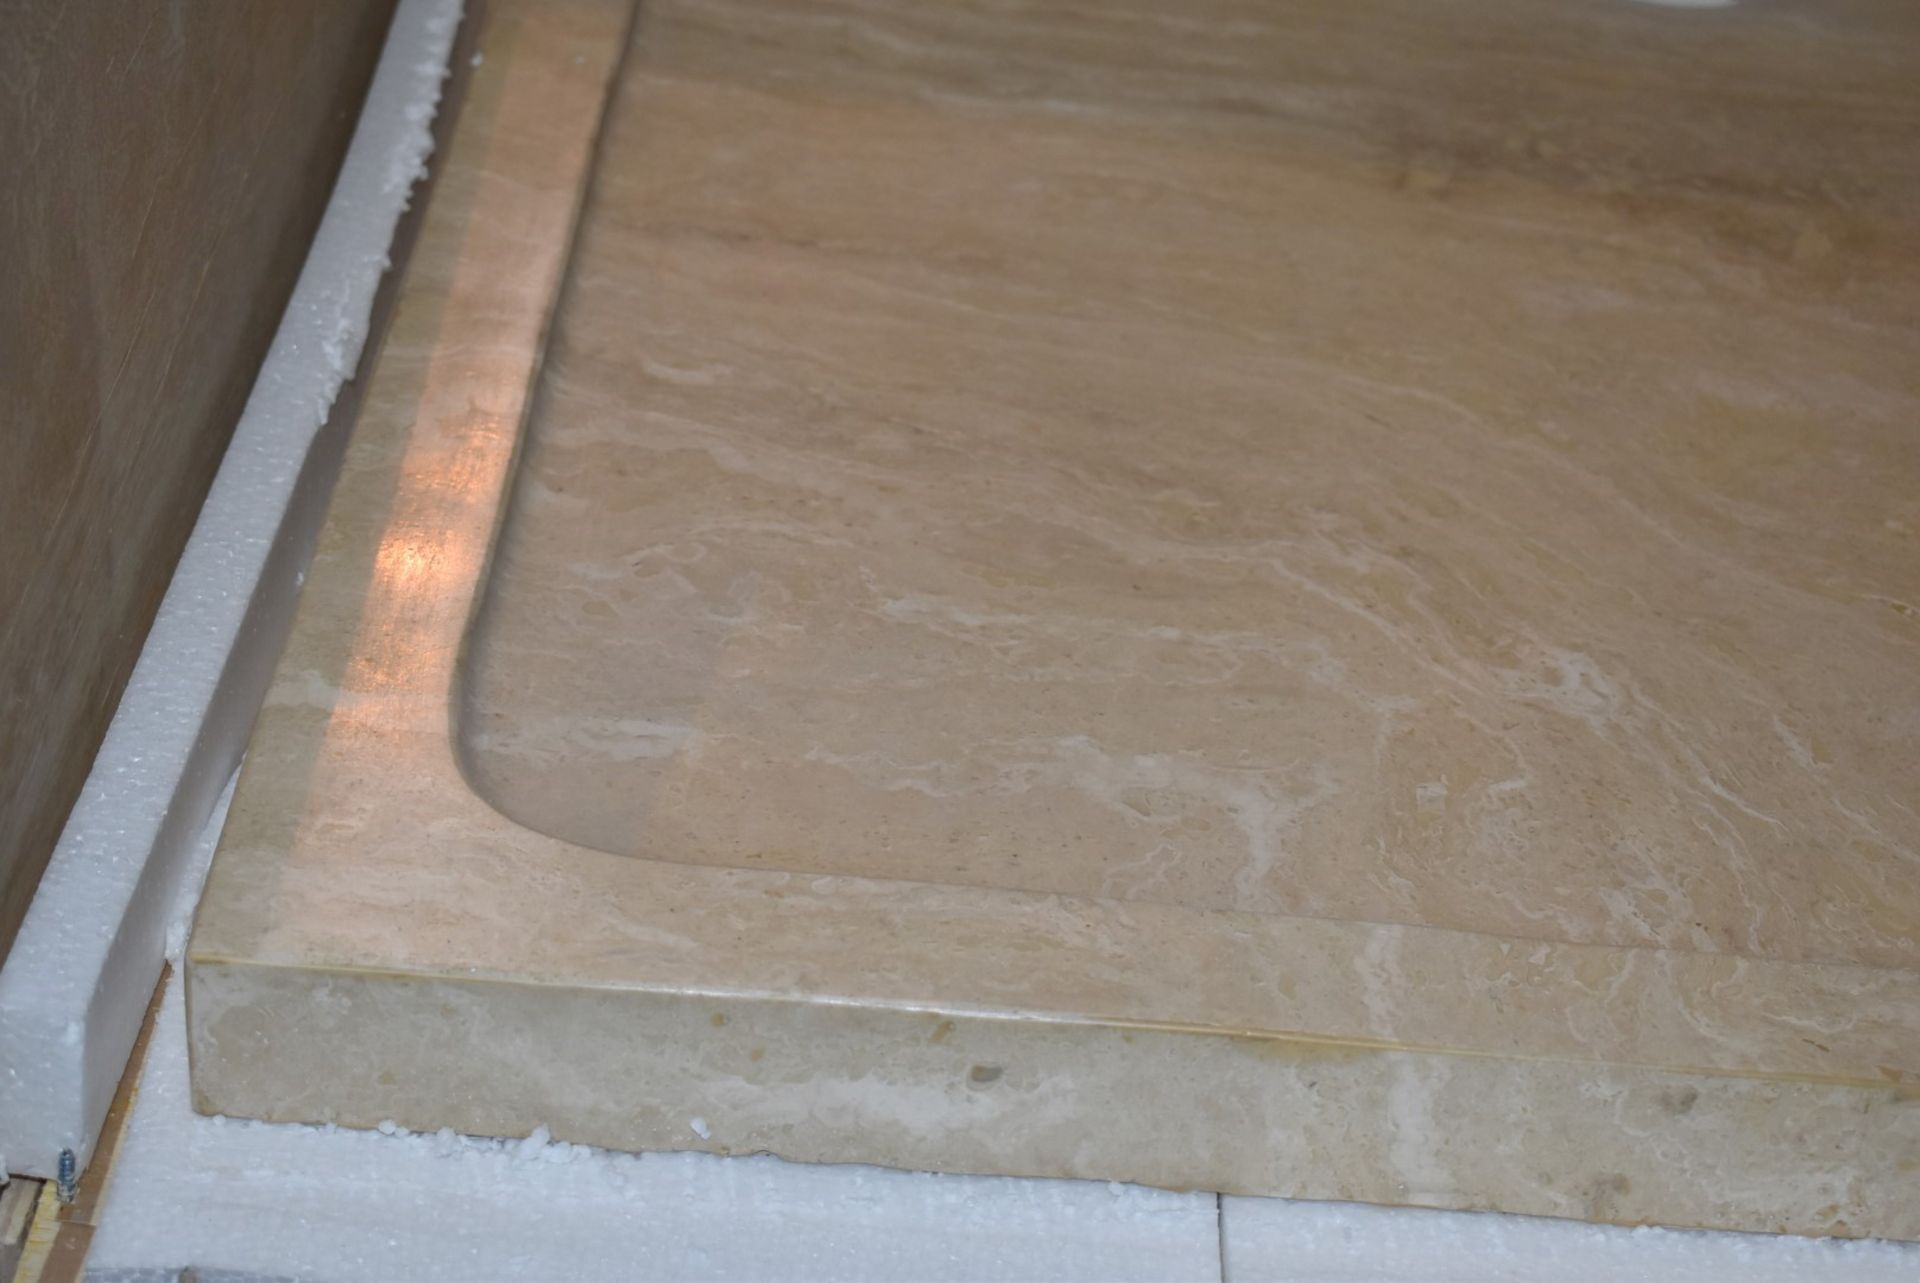 1 x Stonearth Luxury Solid Travertine Stone 900mm Shower Tray - Hand Made From Travertine Stone - Image 11 of 12